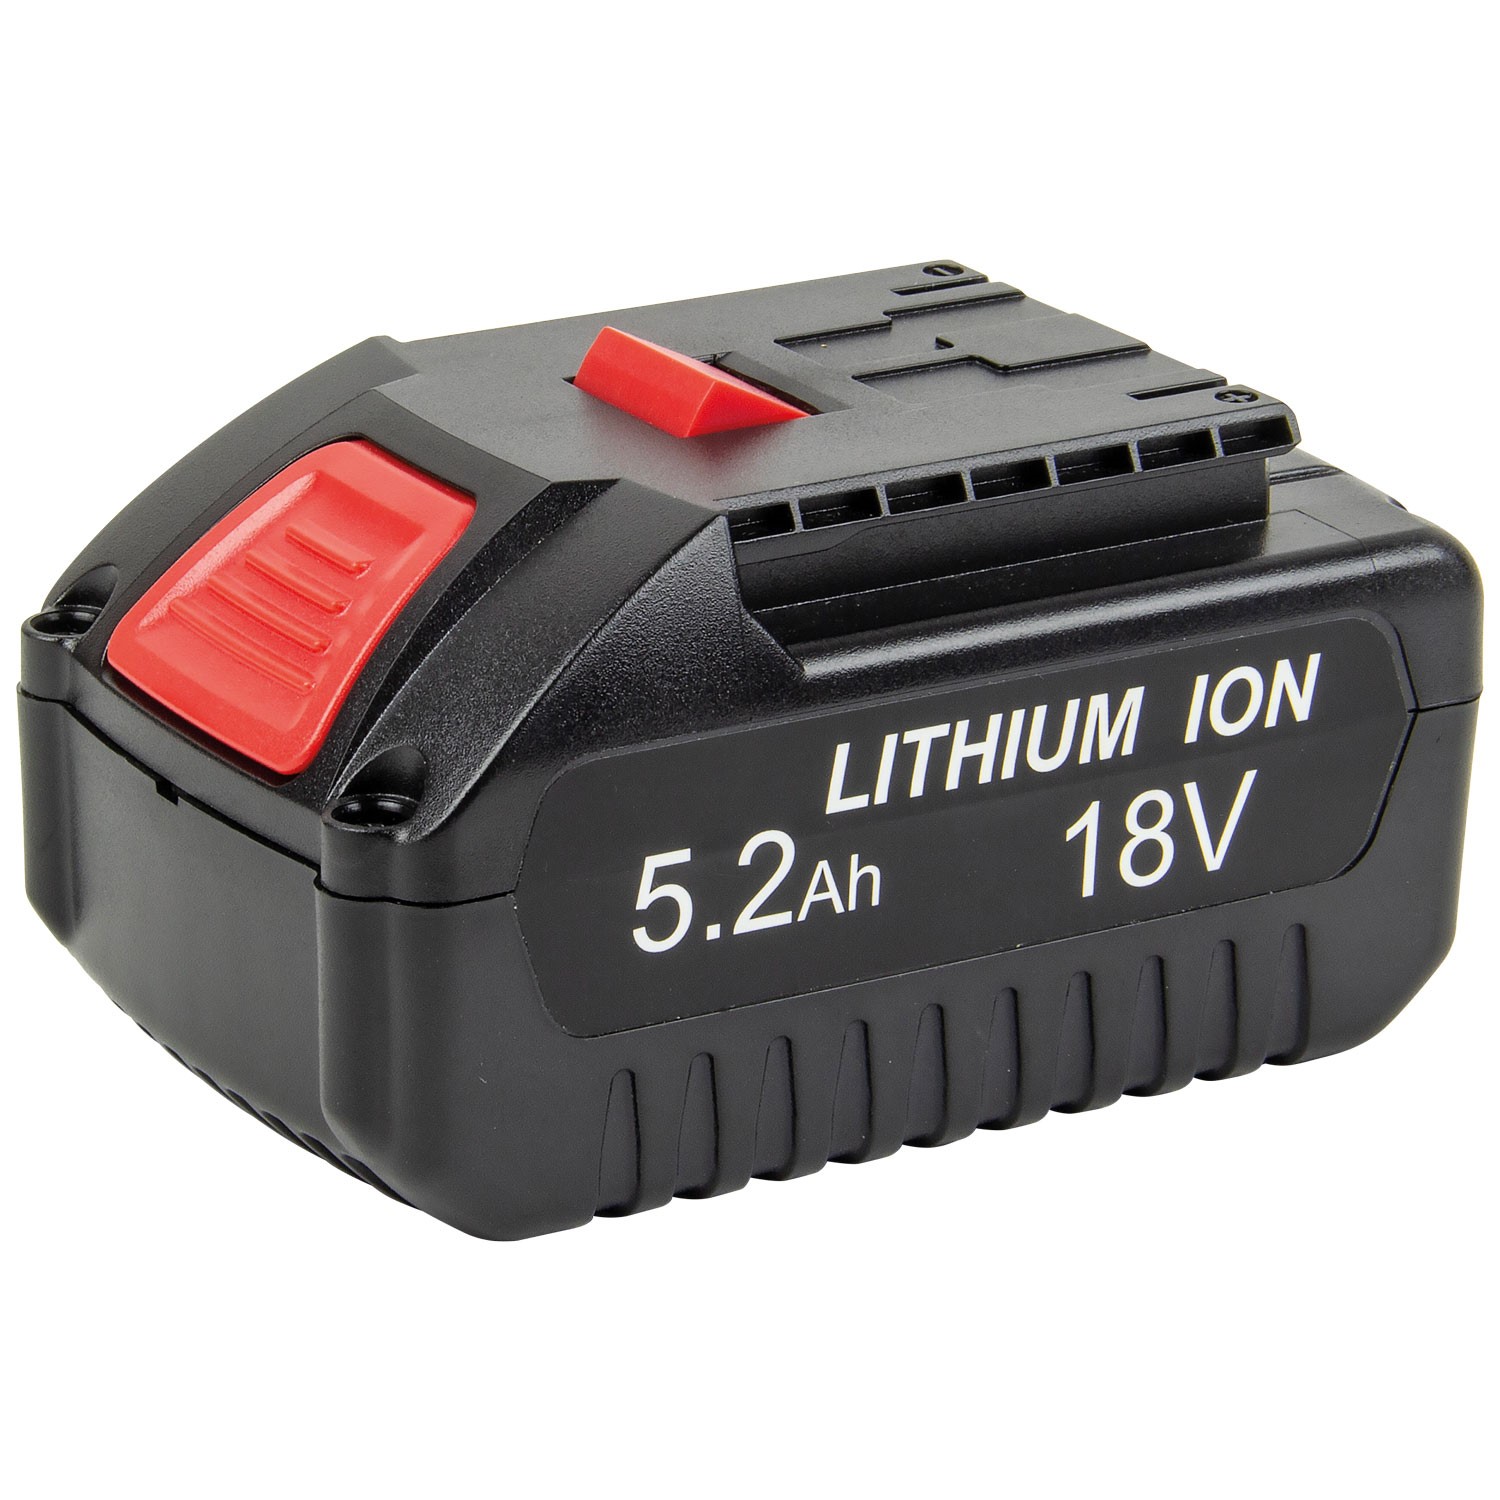 High-quality rechargeable 18v DC 5.2Ah Lithium battery